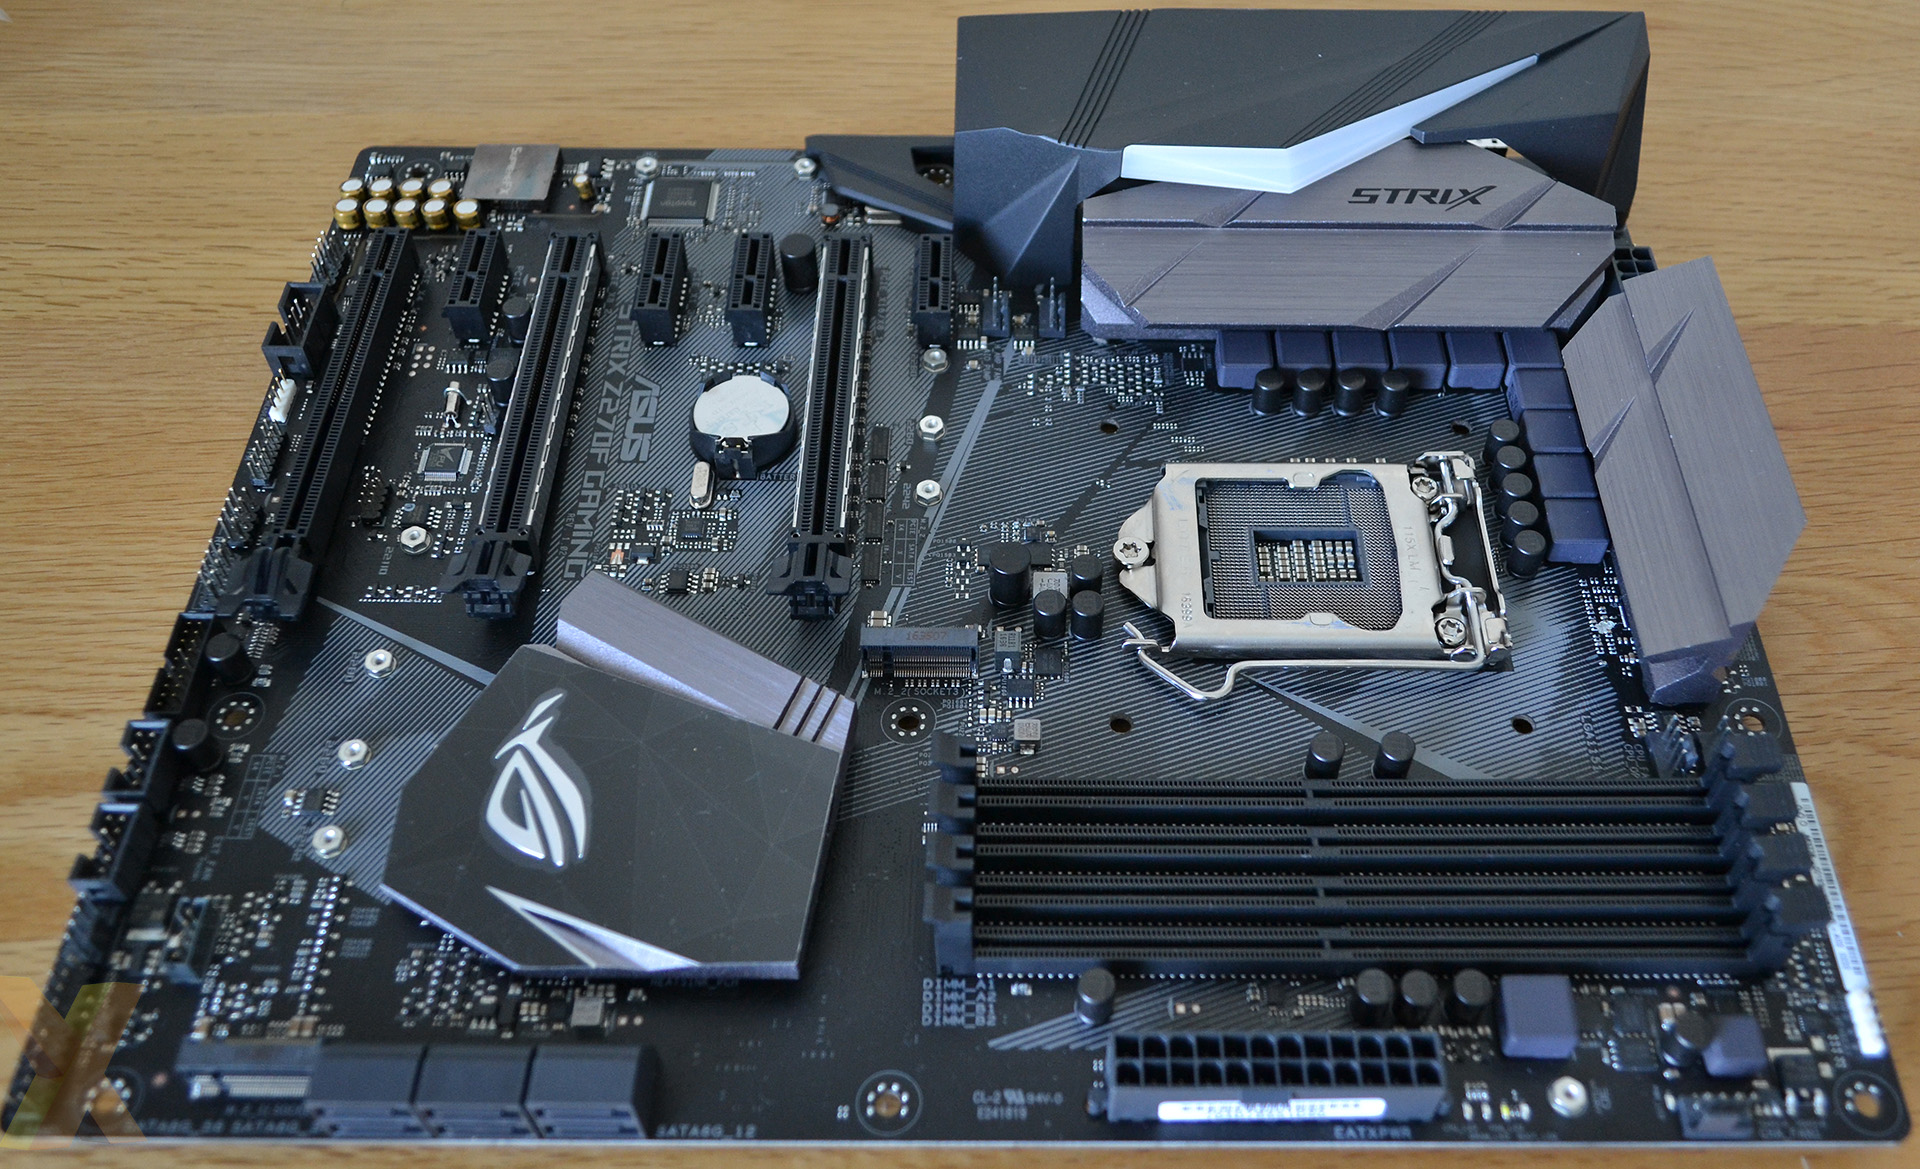 Reductor close caress Review: Asus ROG Strix Z270F Gaming - Mainboard - HEXUS.net